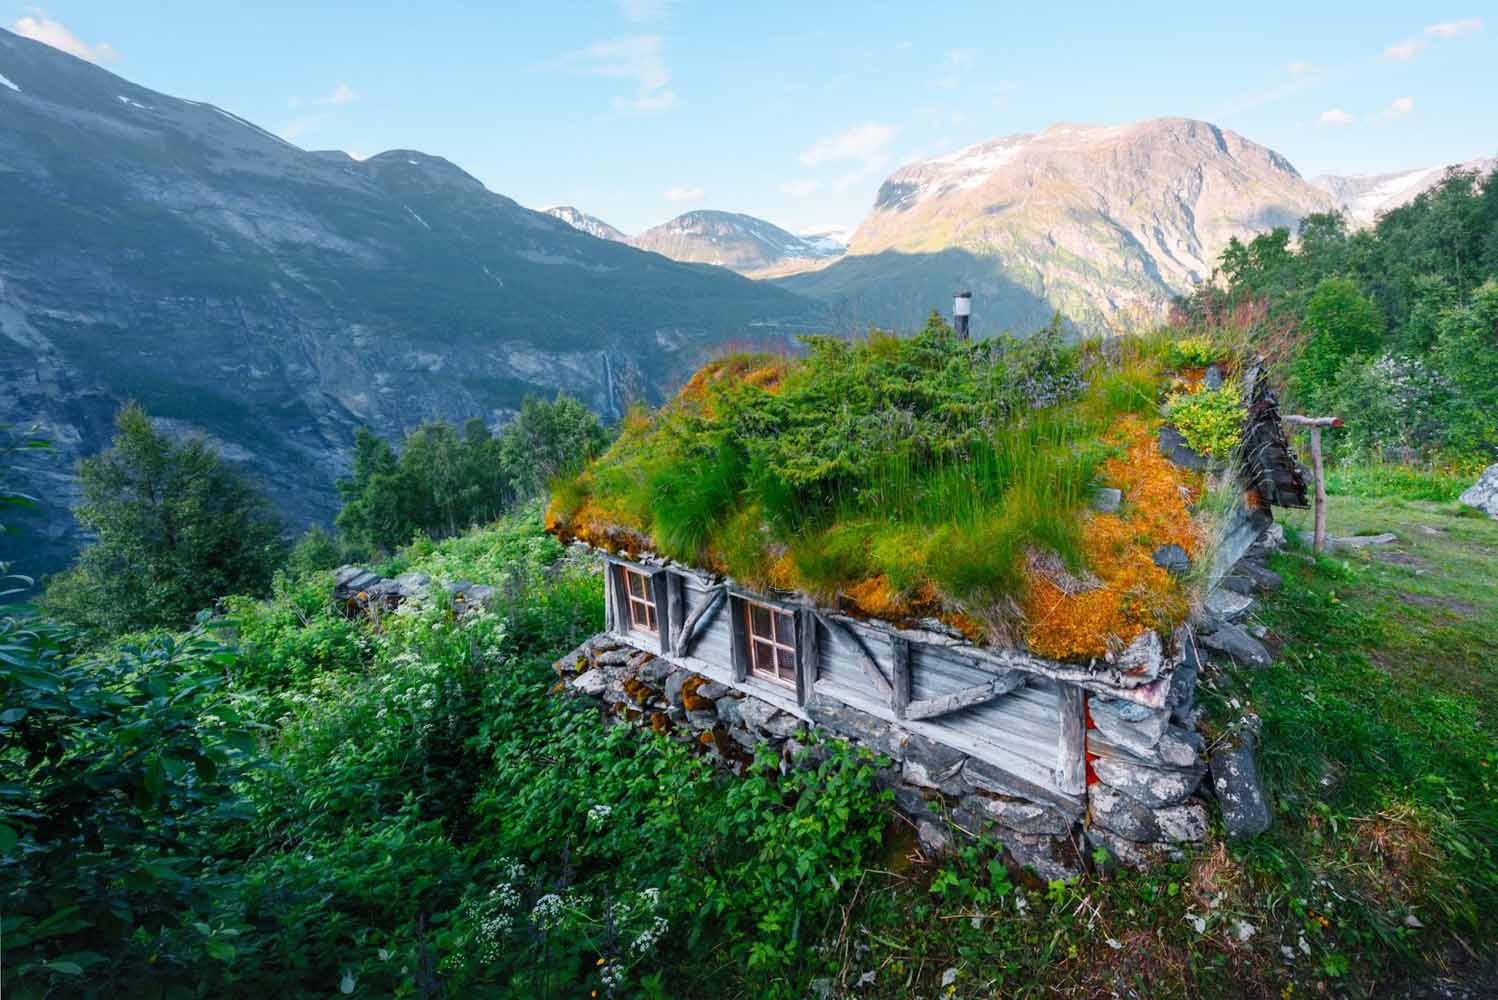 Living roof on a cabin in the mountains